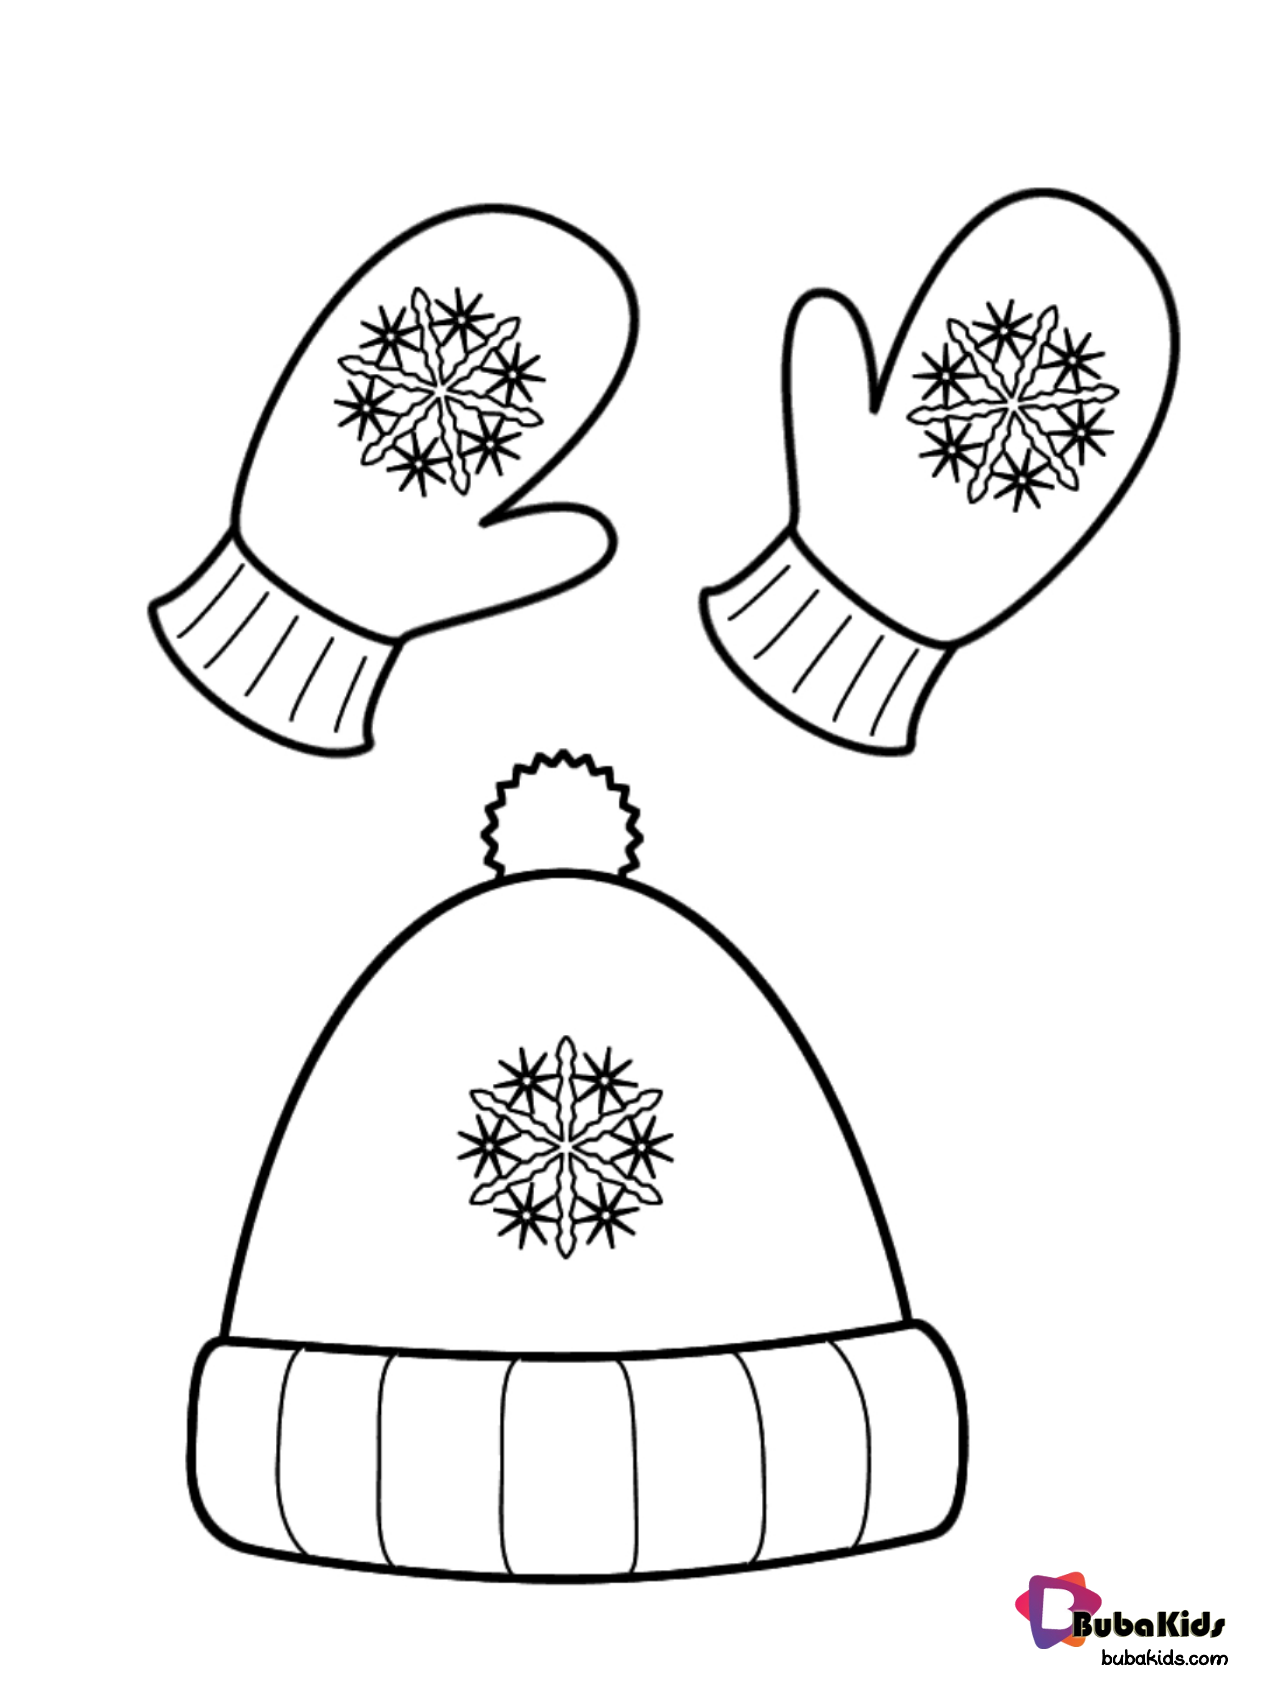 Free Winter hat and gloves coloring page. Wallpaper